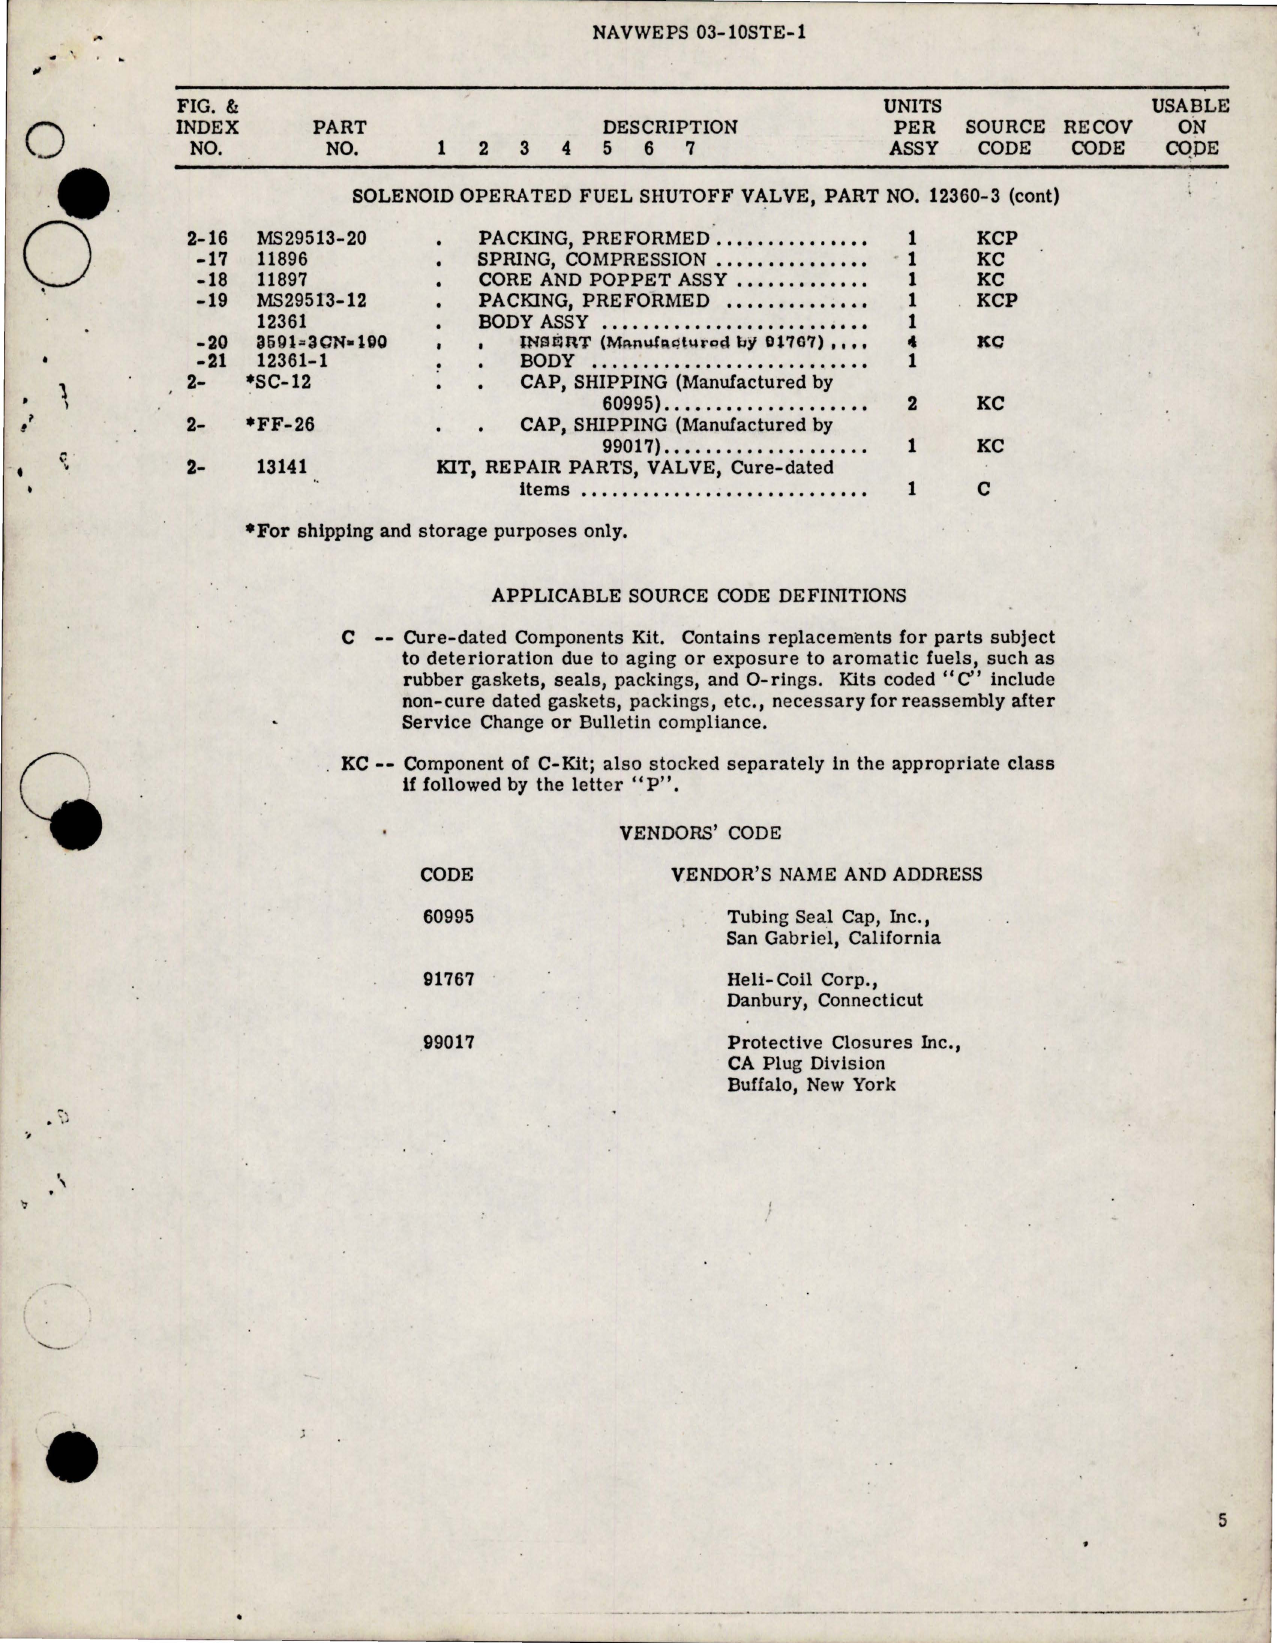 Sample page 5 from AirCorps Library document: Overhaul Instructions with Parts for Solenoid Operated Fuel Shutoff Valve - Part 12360-3 